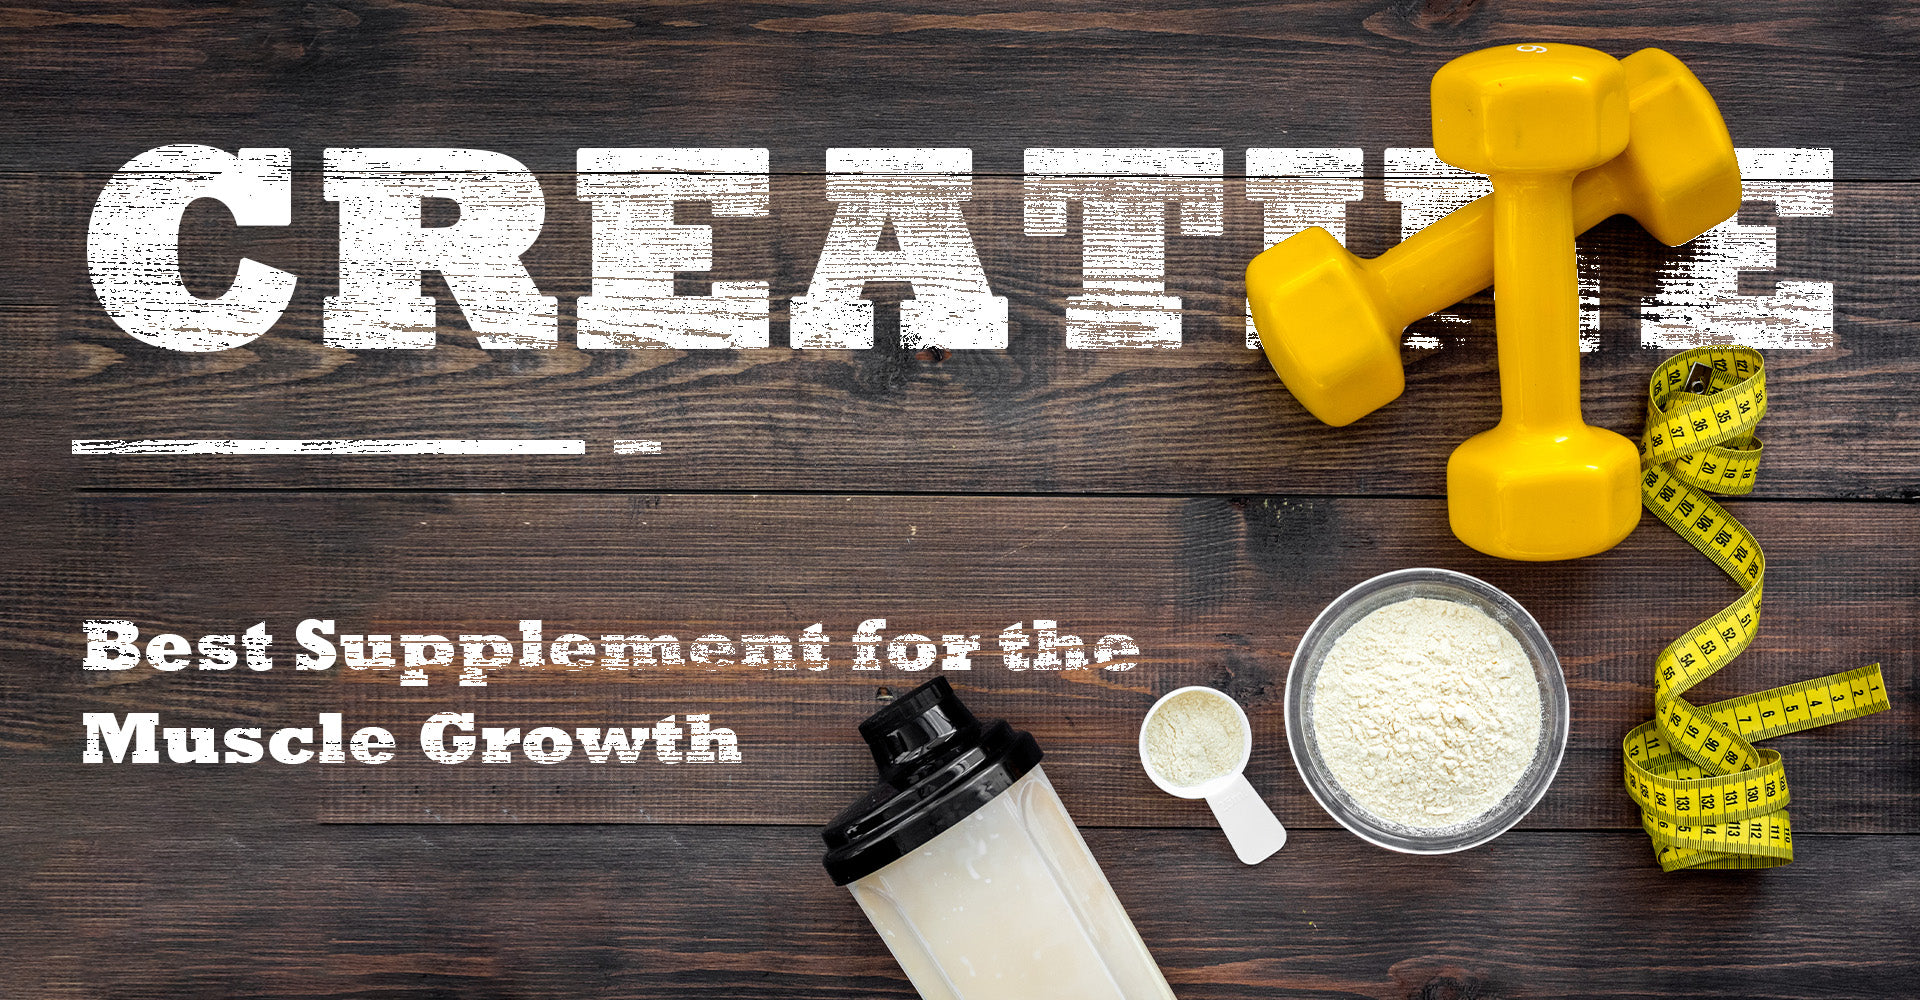 Creatine: Best Supplement for the Muscle Growth